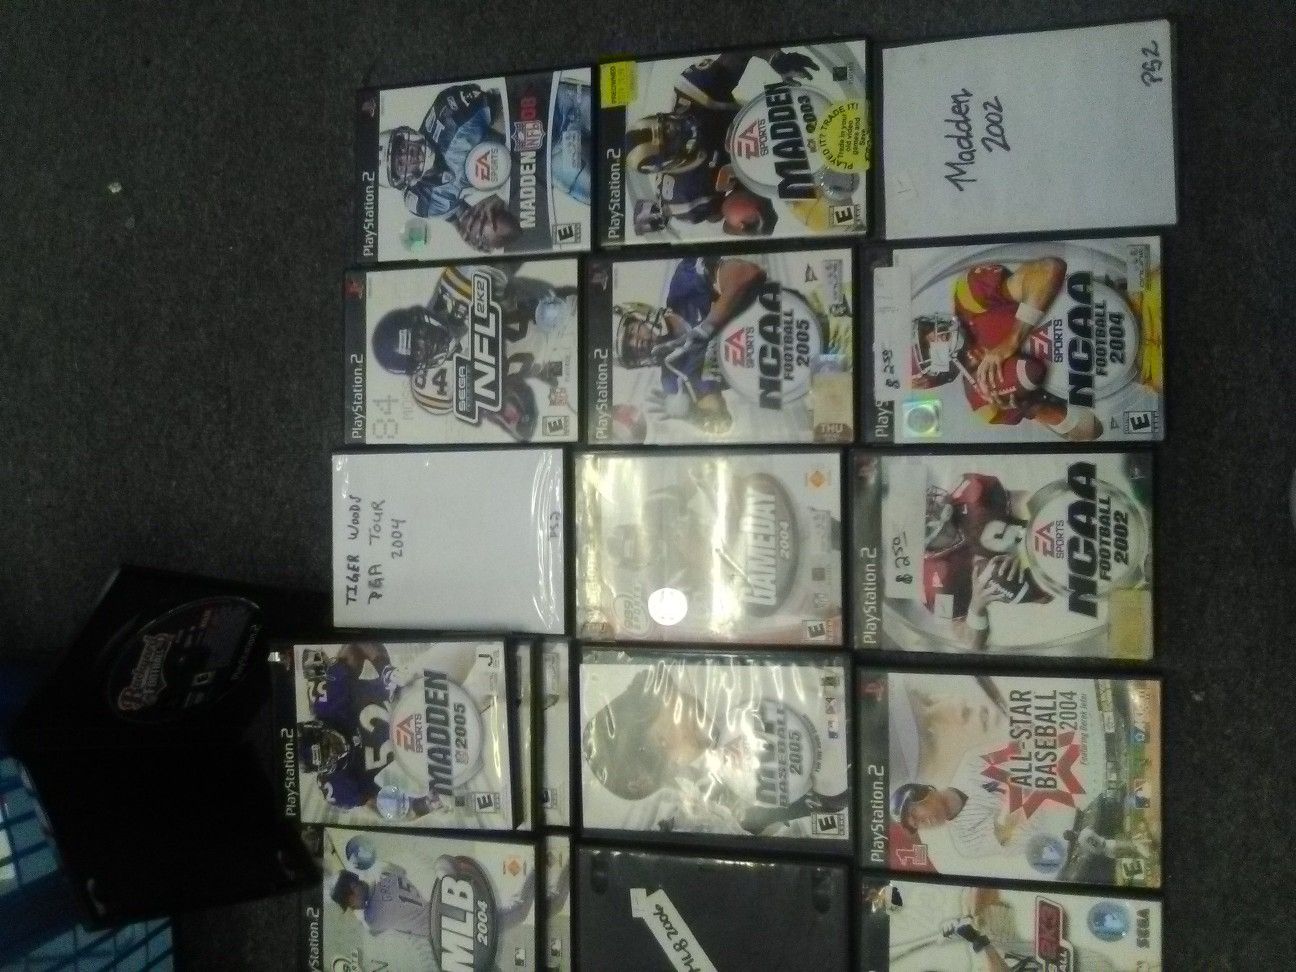 Ps2 games prices vary